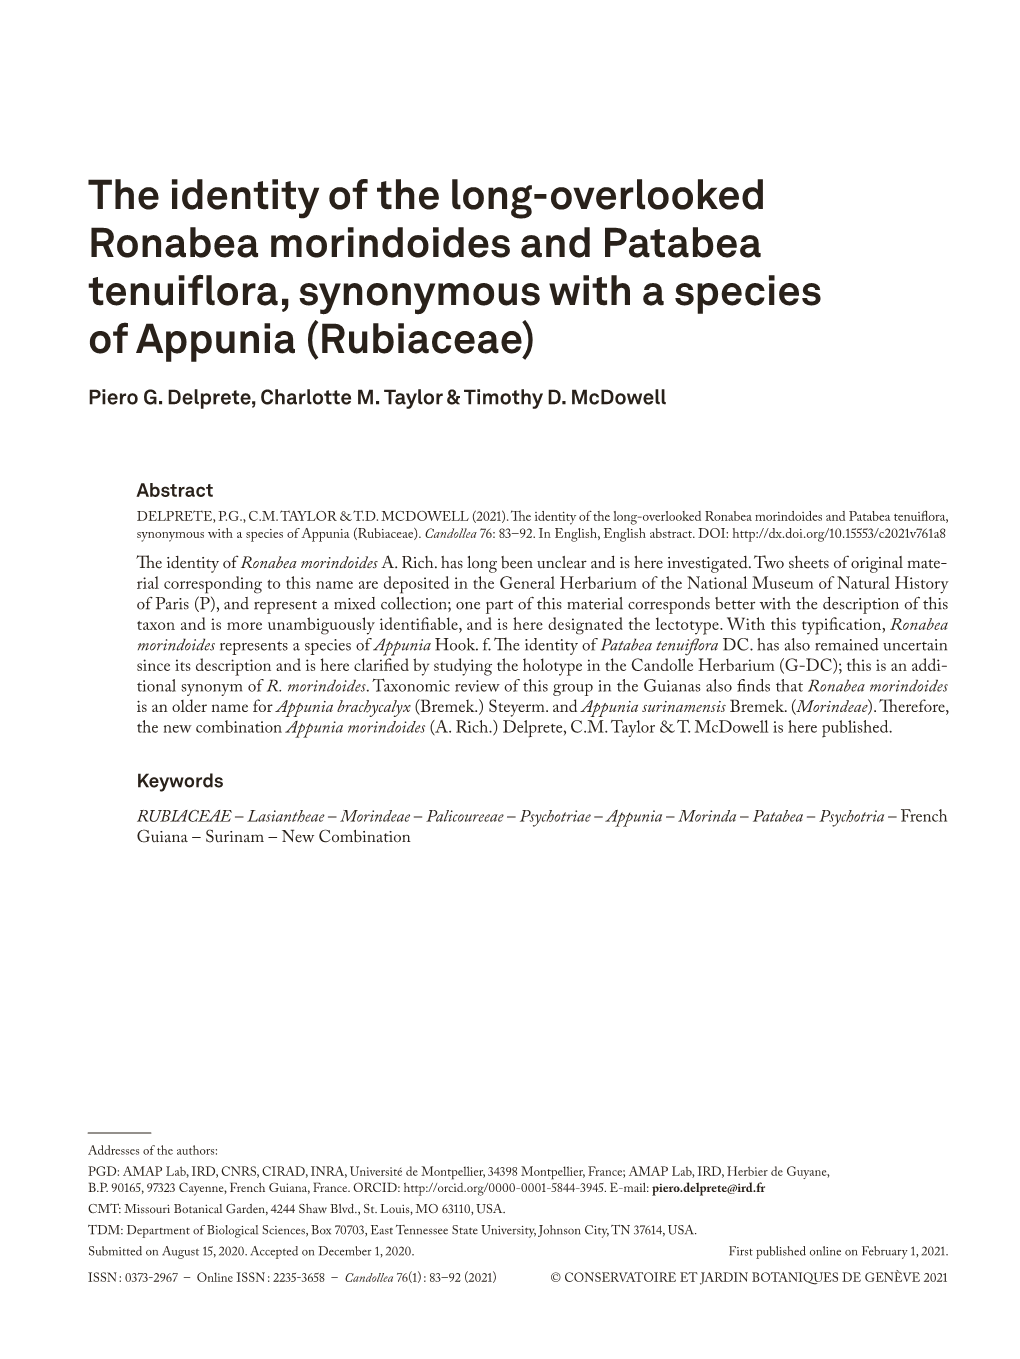 The Identity of the Long-Overlooked Ronabea Morindoides and Patabea Tenuiflora, Synonymous with a Species of Appunia (Rubiaceae)